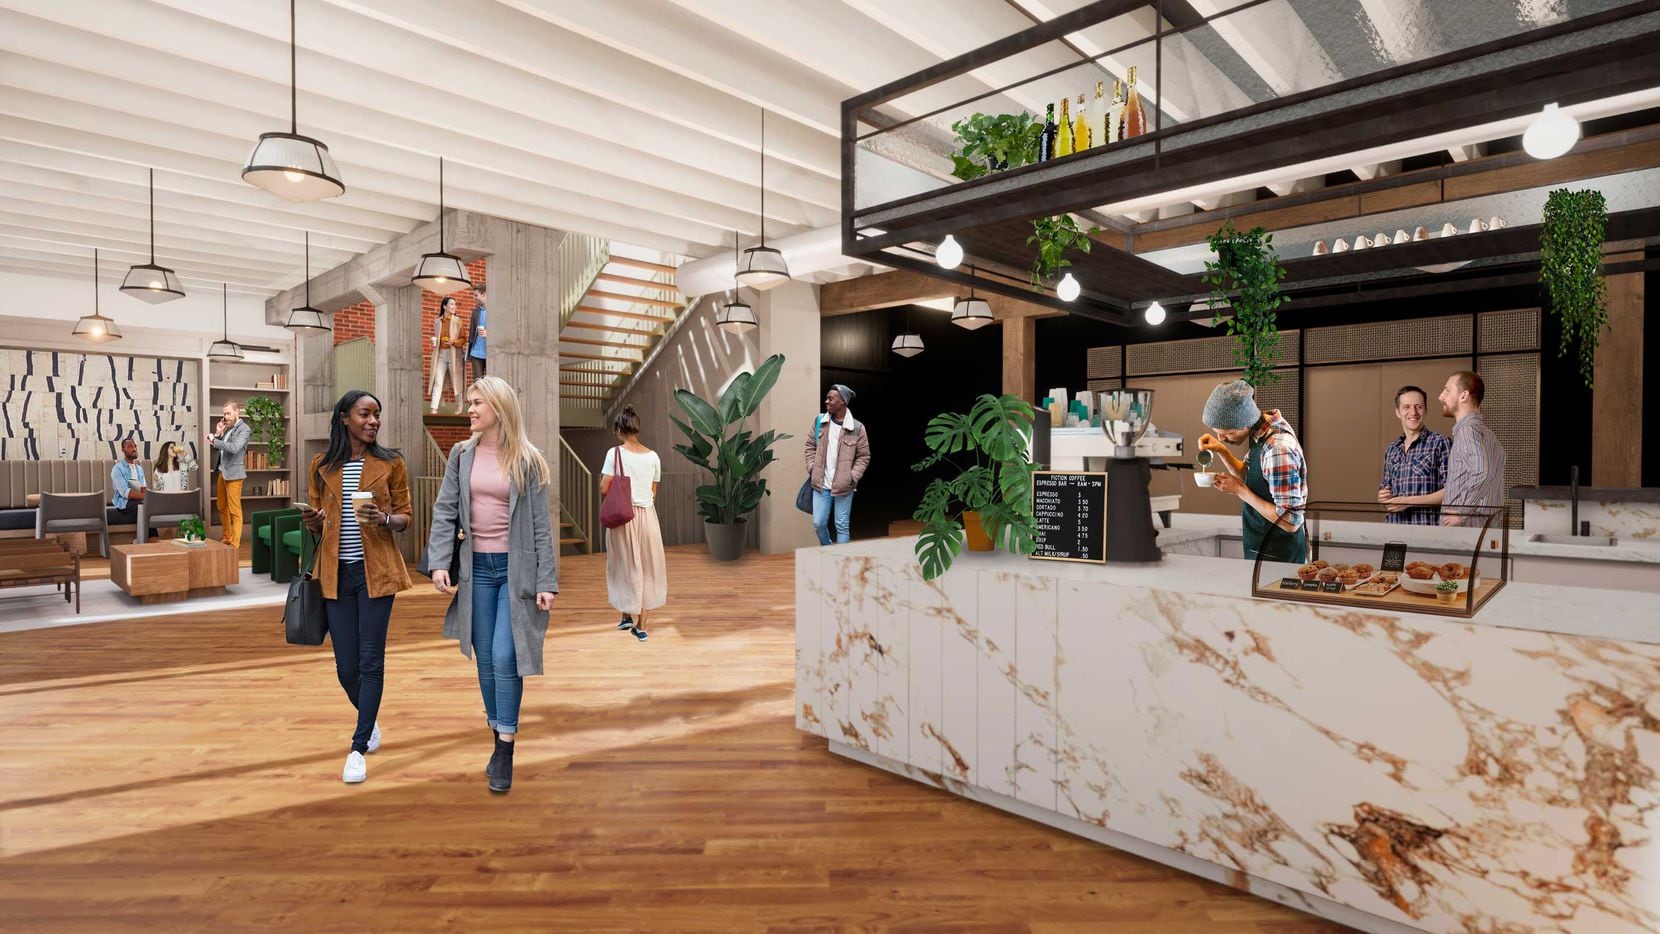 Common Desk's Continental Gin Building location will open early next year.